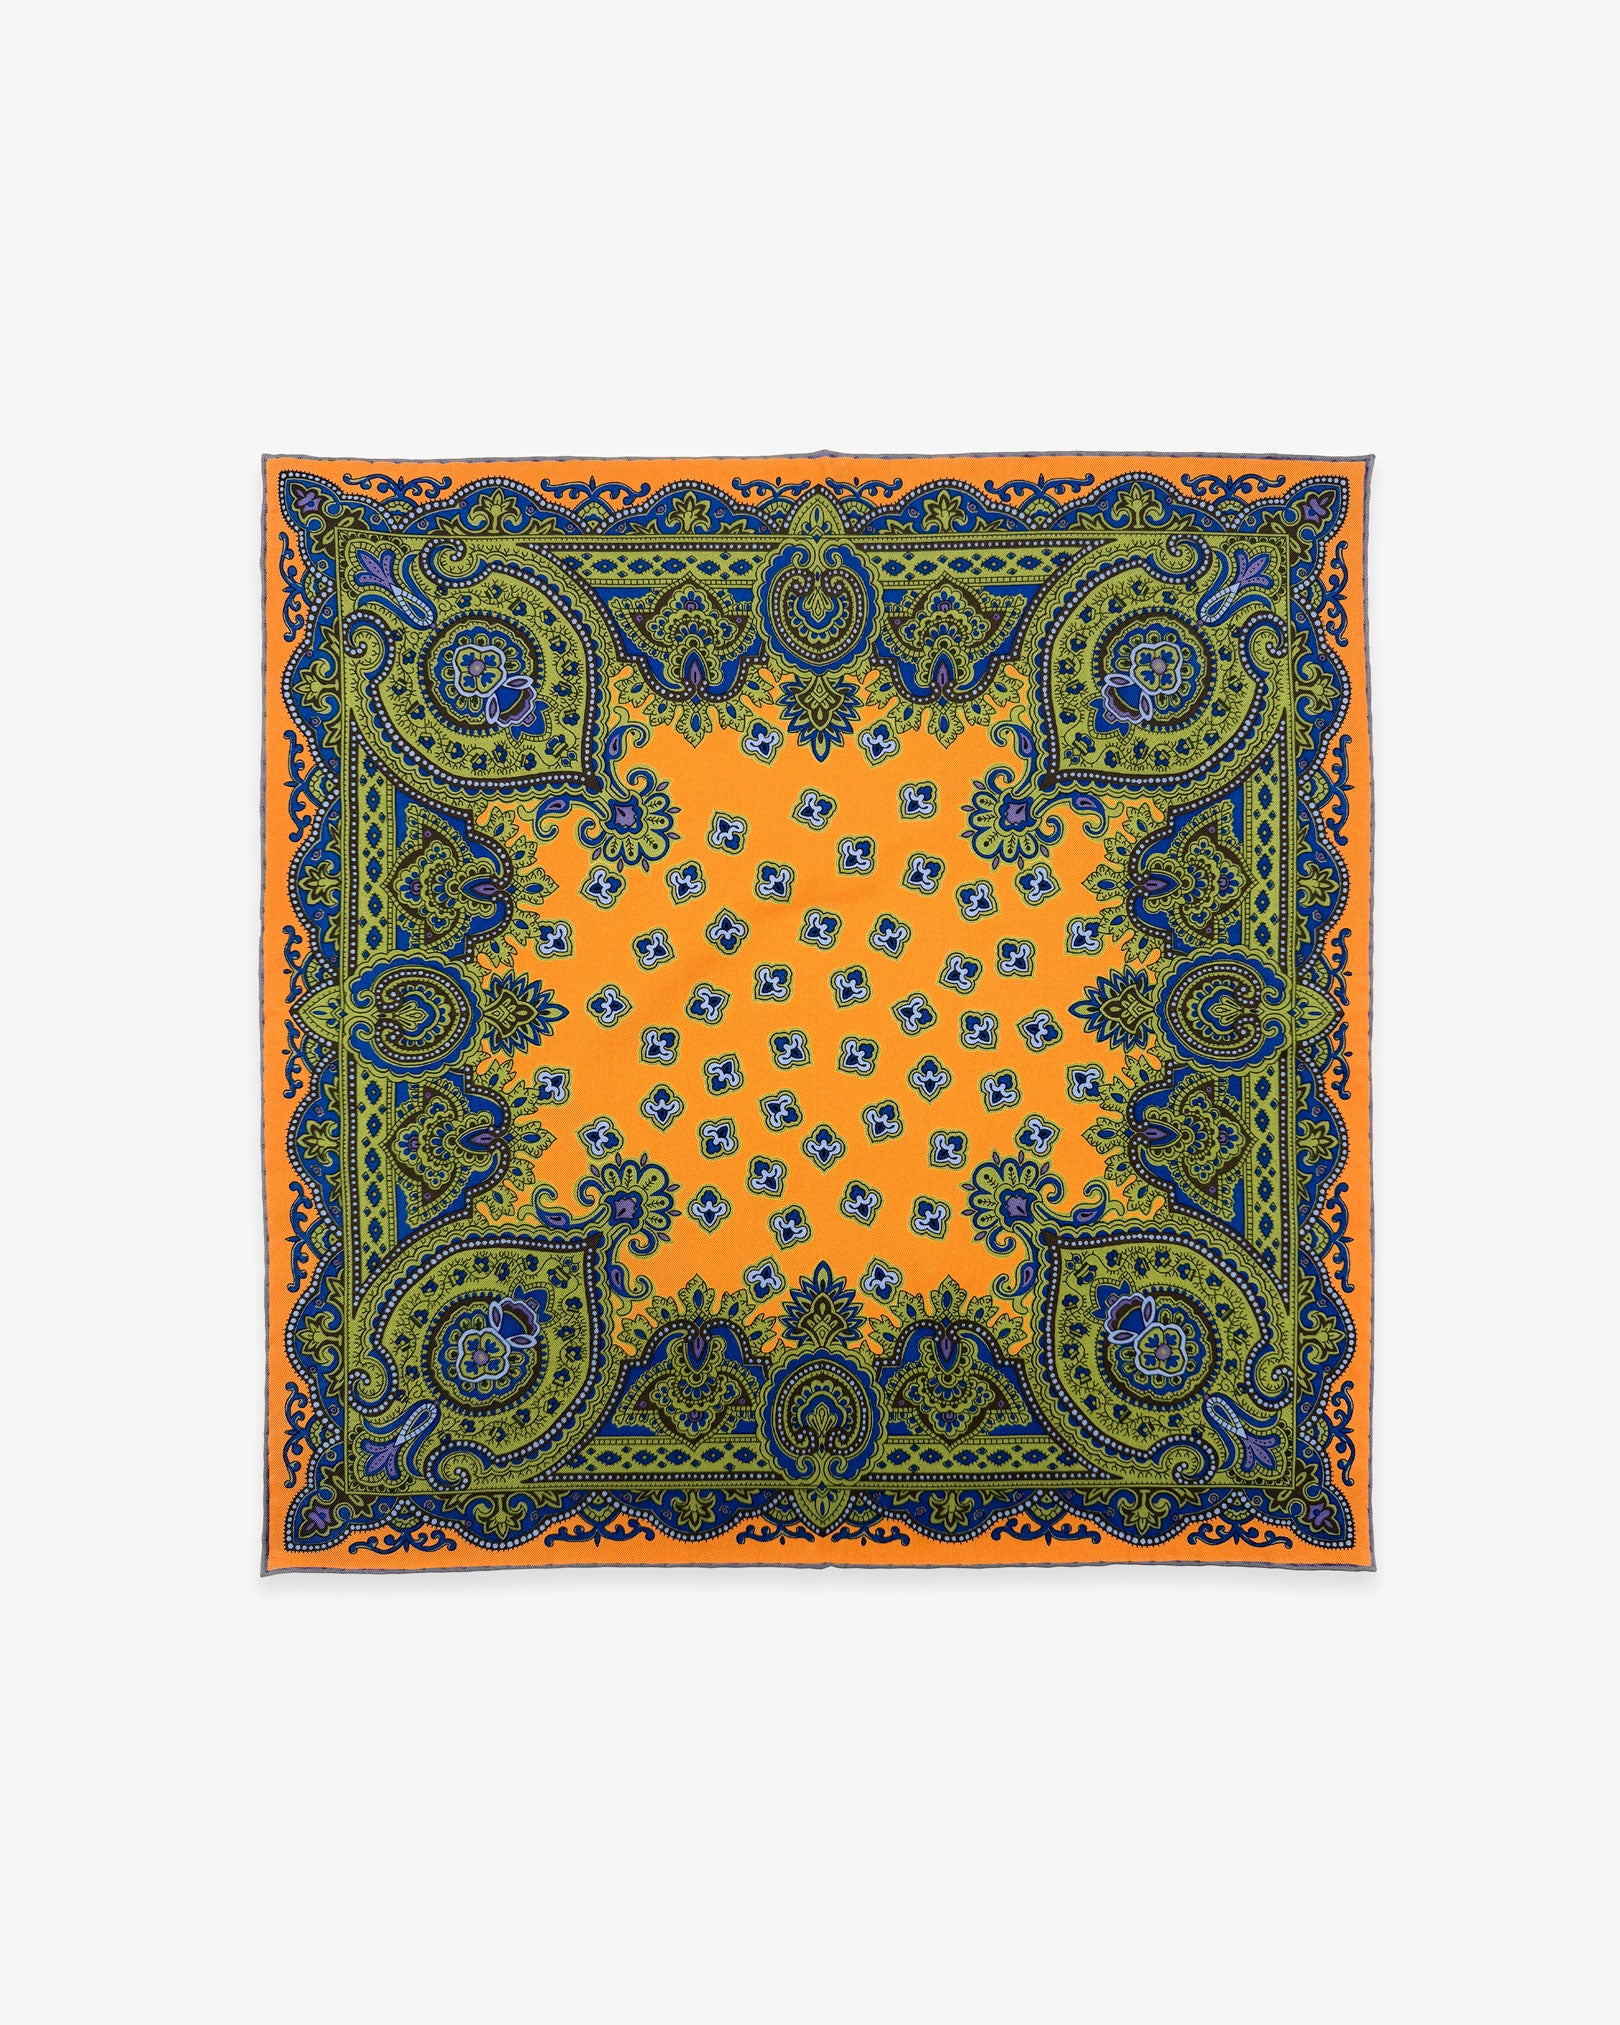 Fully unfolded 'Ambleside' English madder silk pocket square, showing the exquisitely ornate orange, green and blue design.